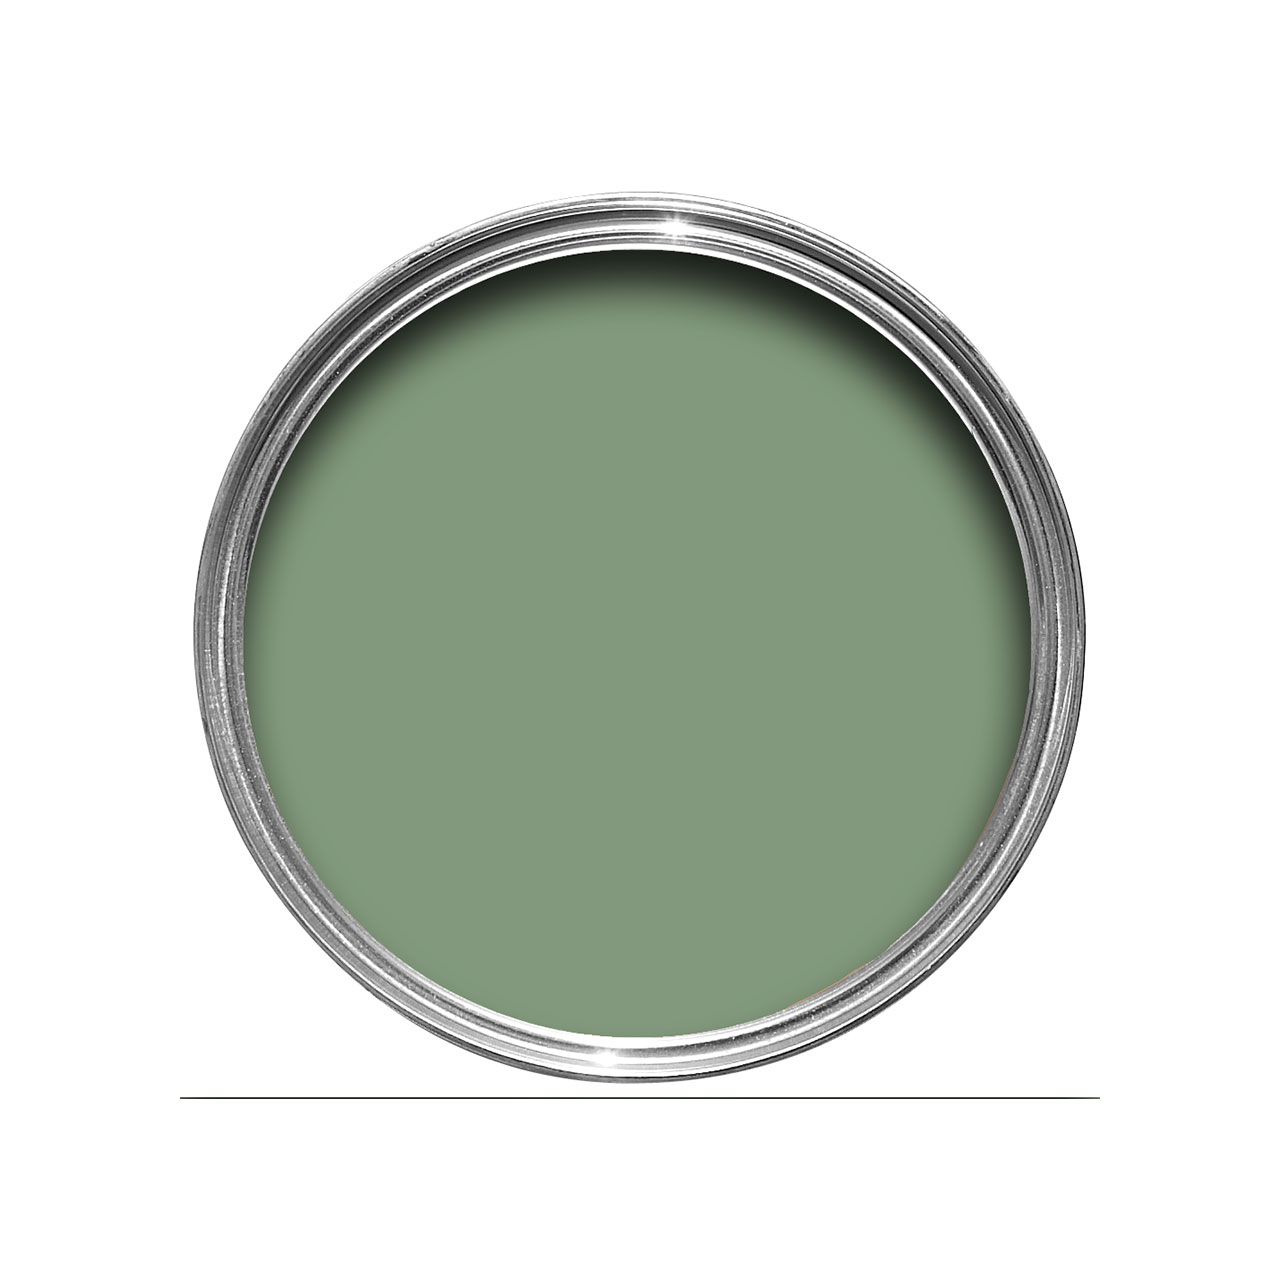 Archive Collection: Pea Green (33)